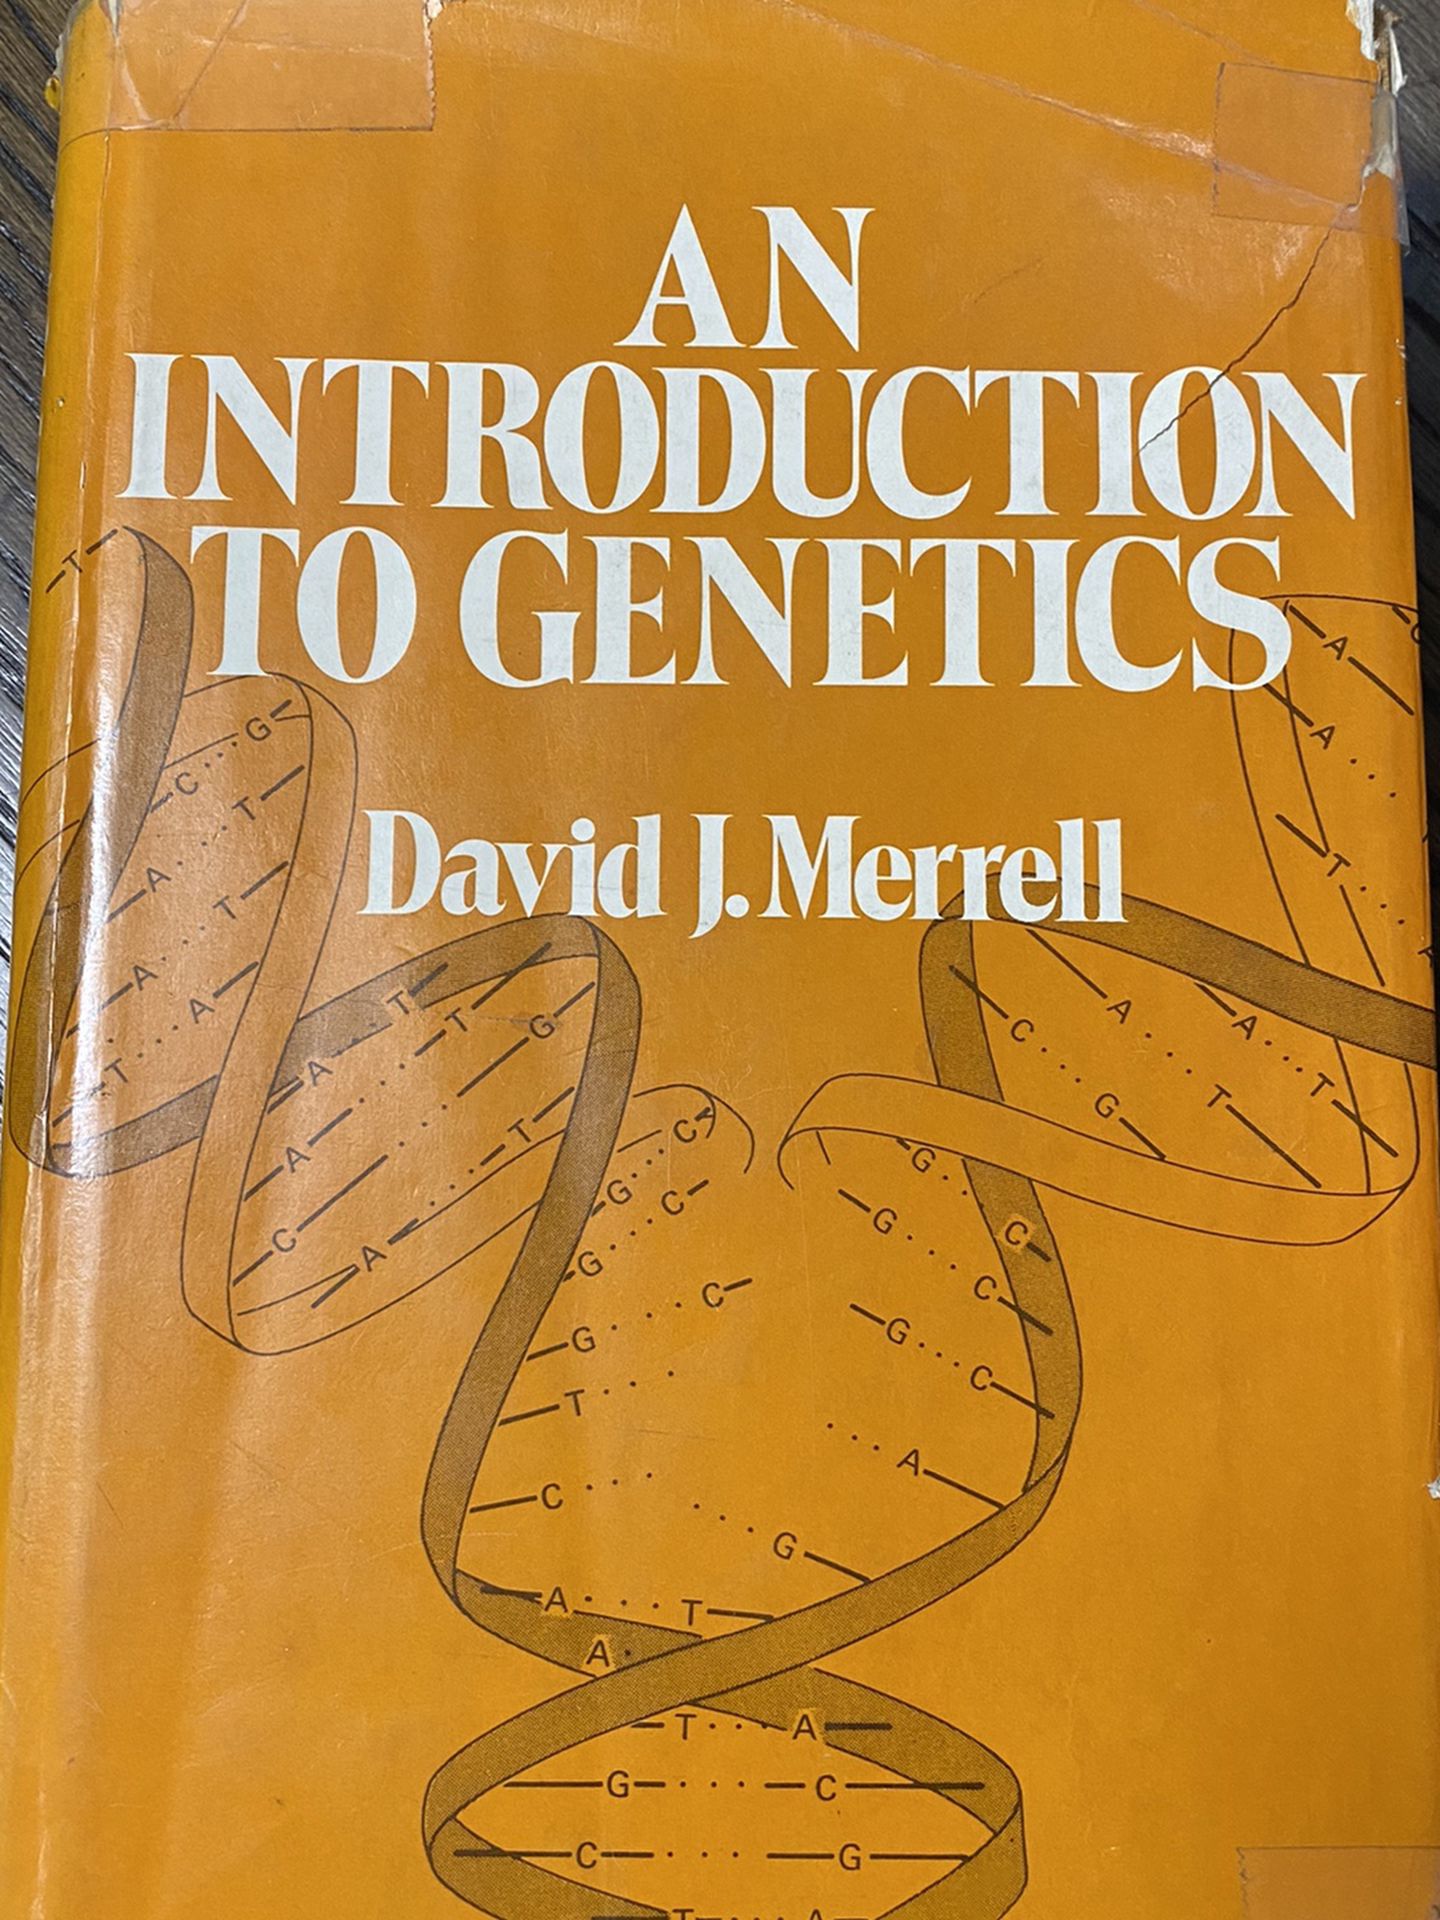 An Introduction To Genetics by David J Merrell